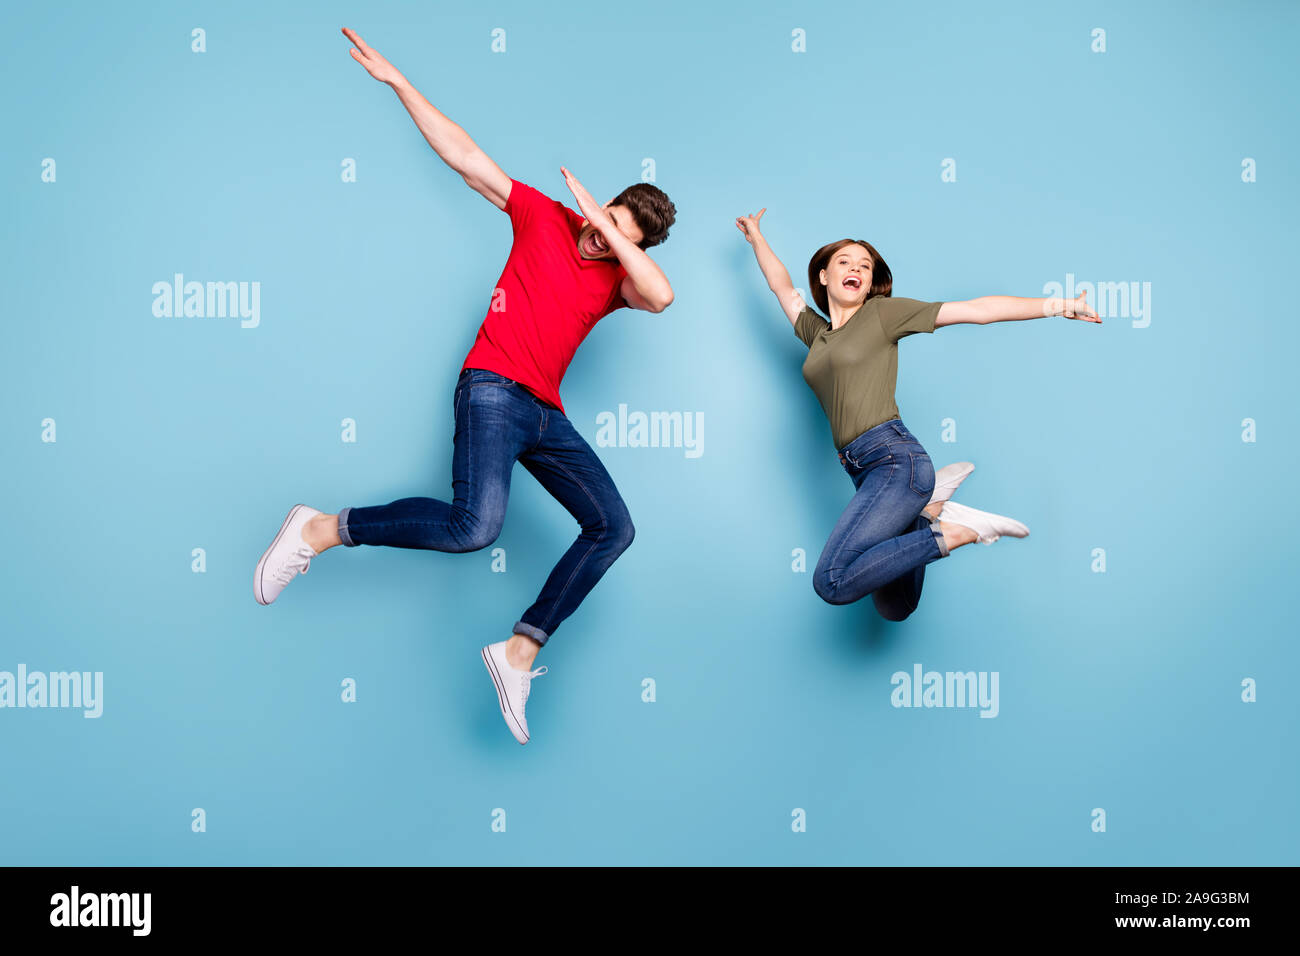 Full size photo of funky crazy two married people students fun jump man perform dab dancers woman raise hands wear green red t-shirt denim jeans Stock Photo